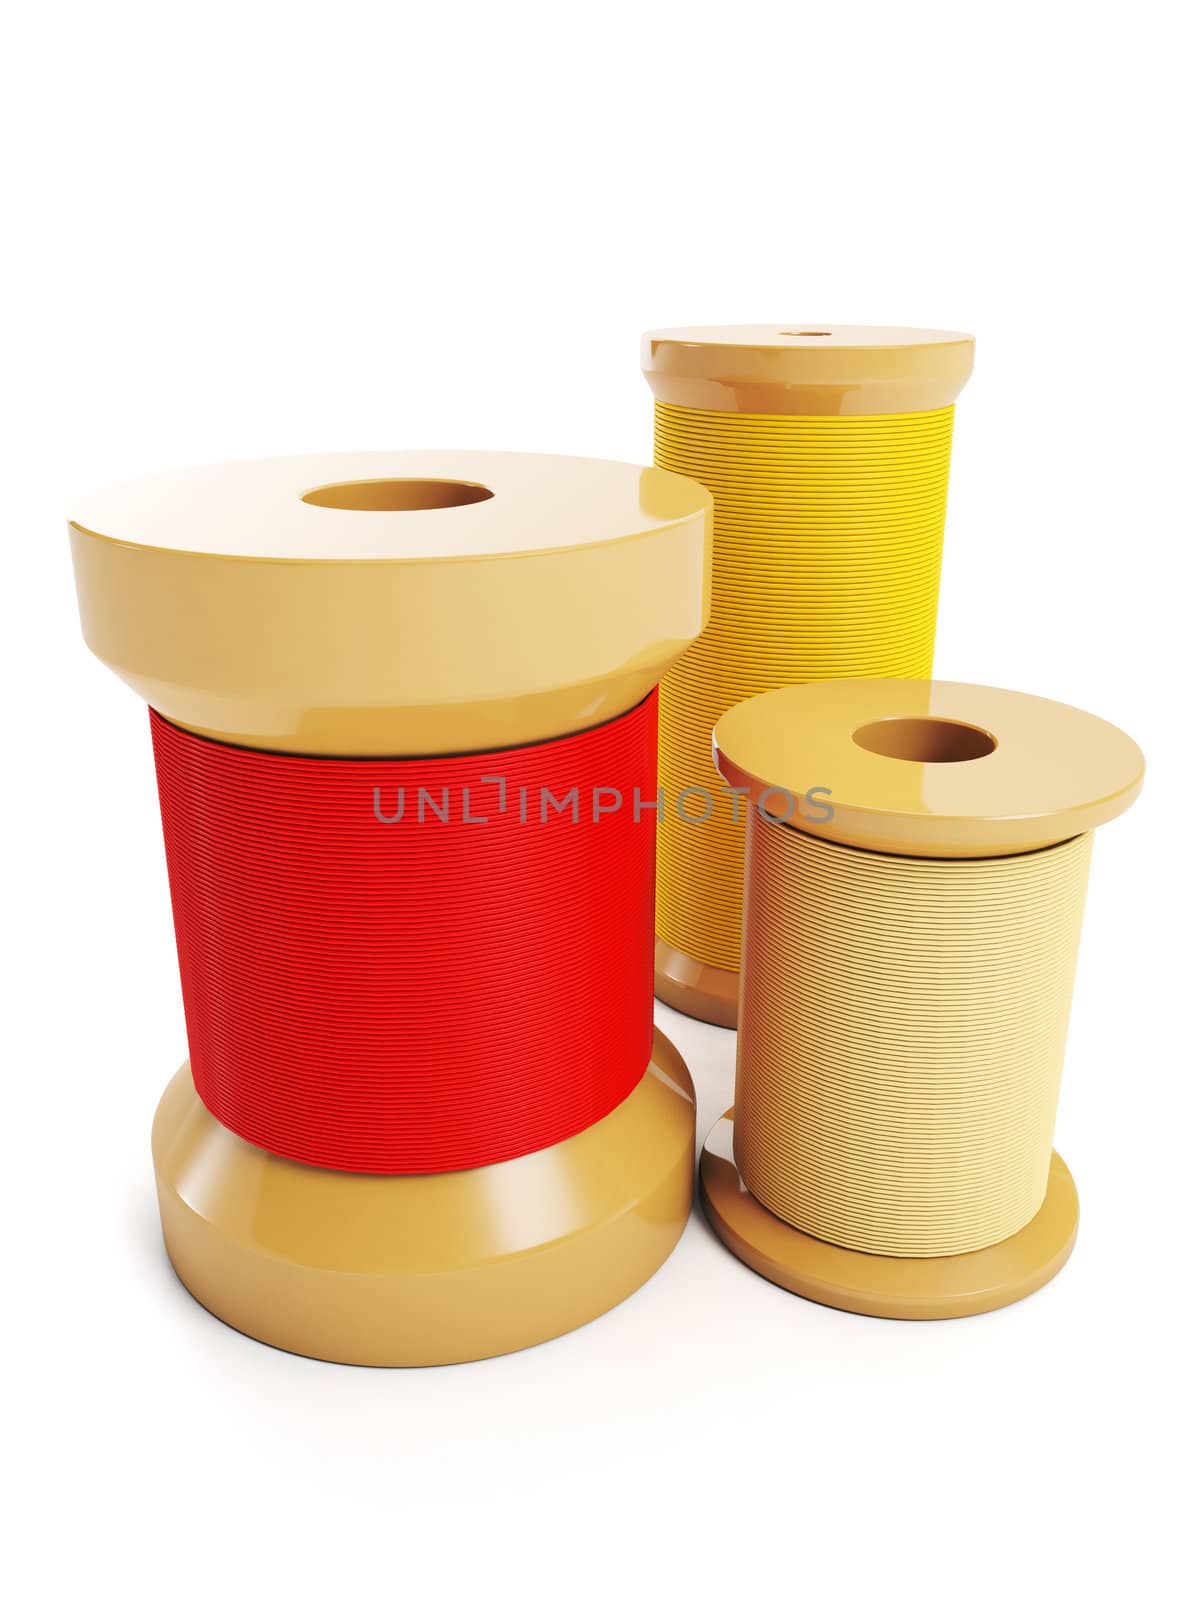 Group of wooden spools of thread. Graphic images on white background